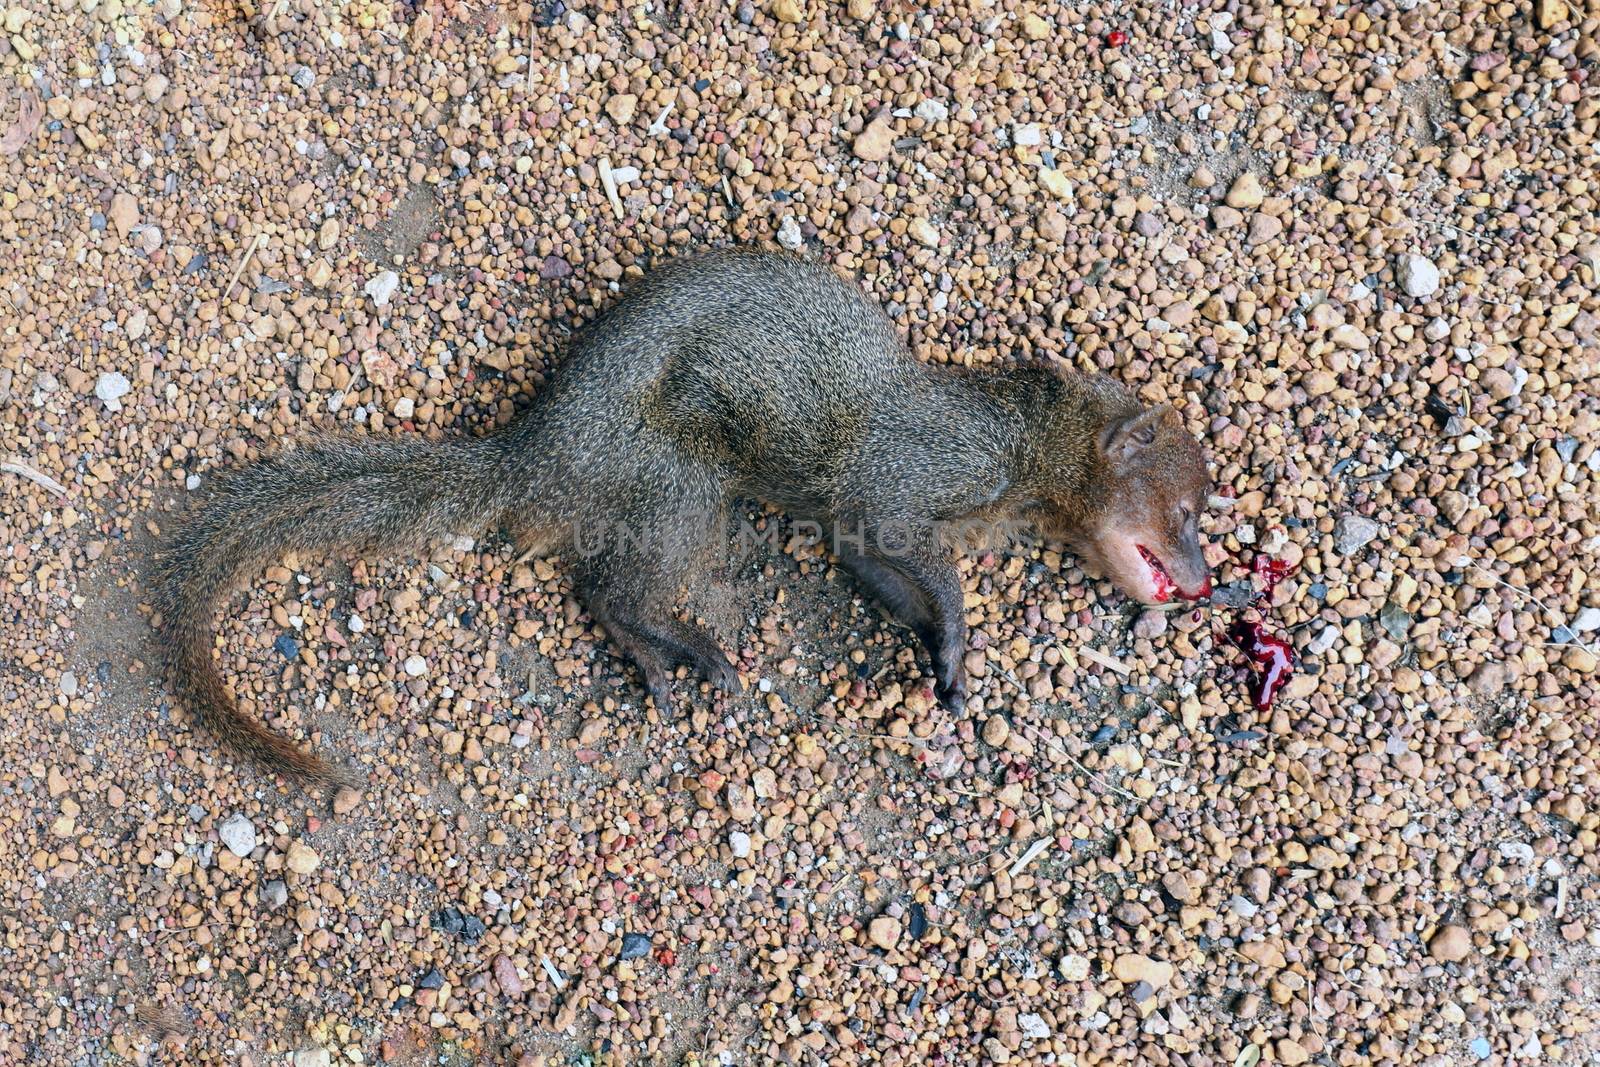 Weasel asia dead on the floor, Ferrets dead on the floor and red blood on mouth, Dead Animals Wildlife, Animal Species, Squirrels Chipmunks dead